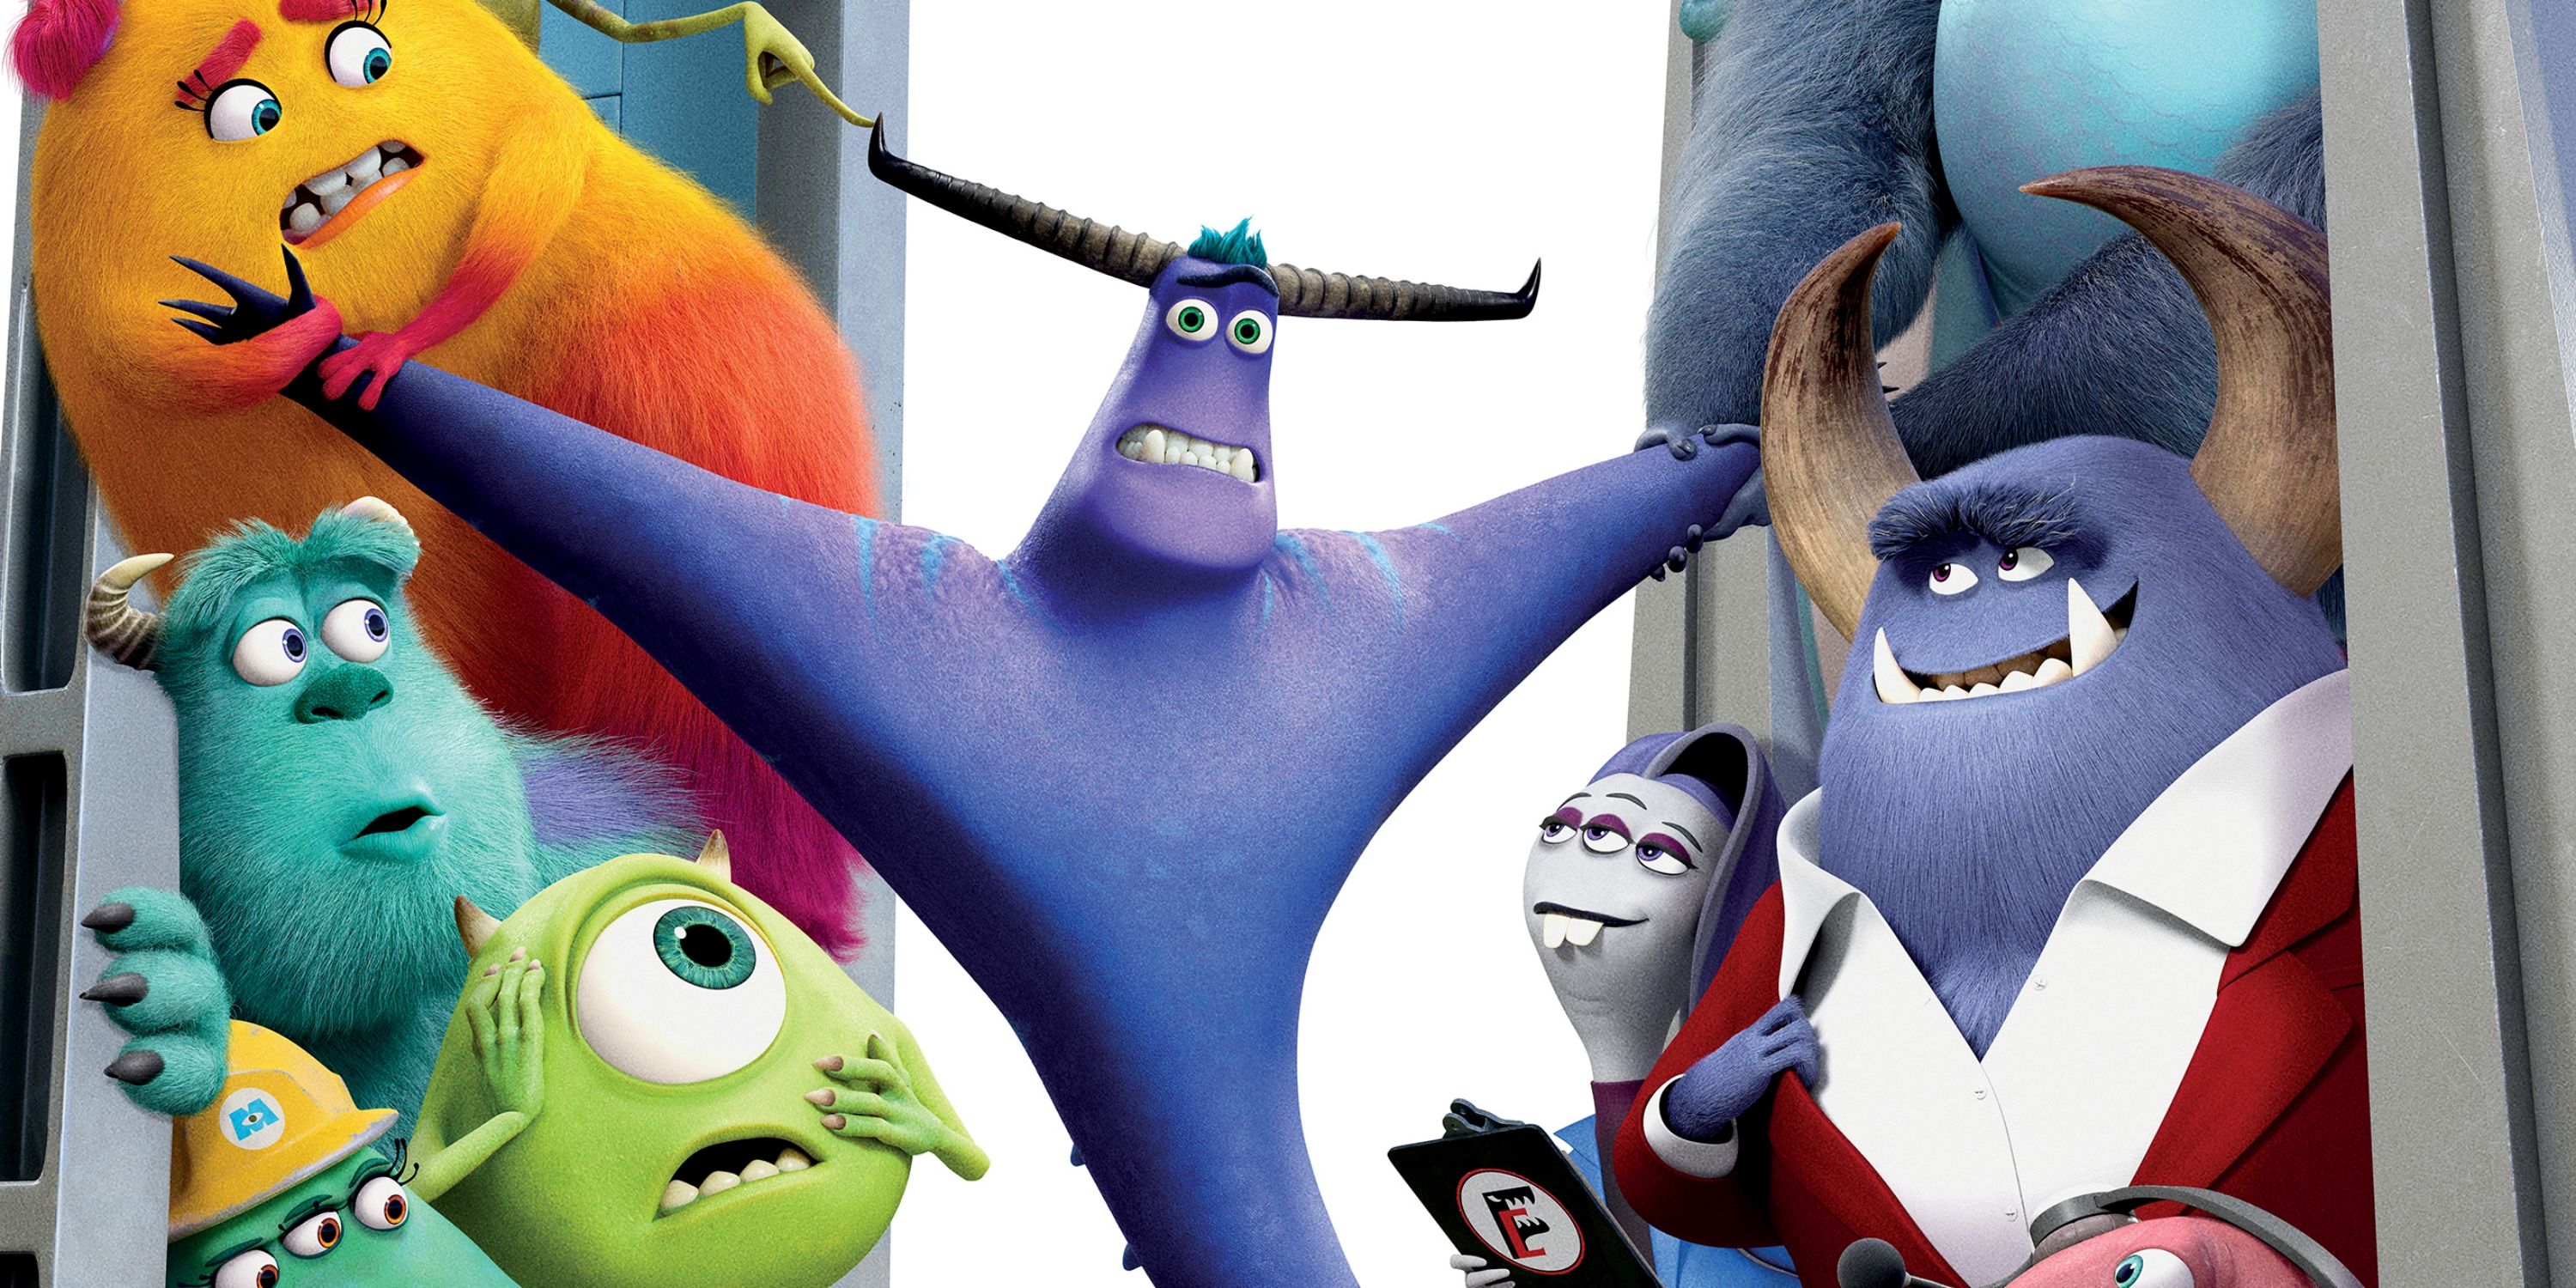 Johnny Worthington with Claire, Mike, Sulley and Tylor in the middle for Monsters at Work